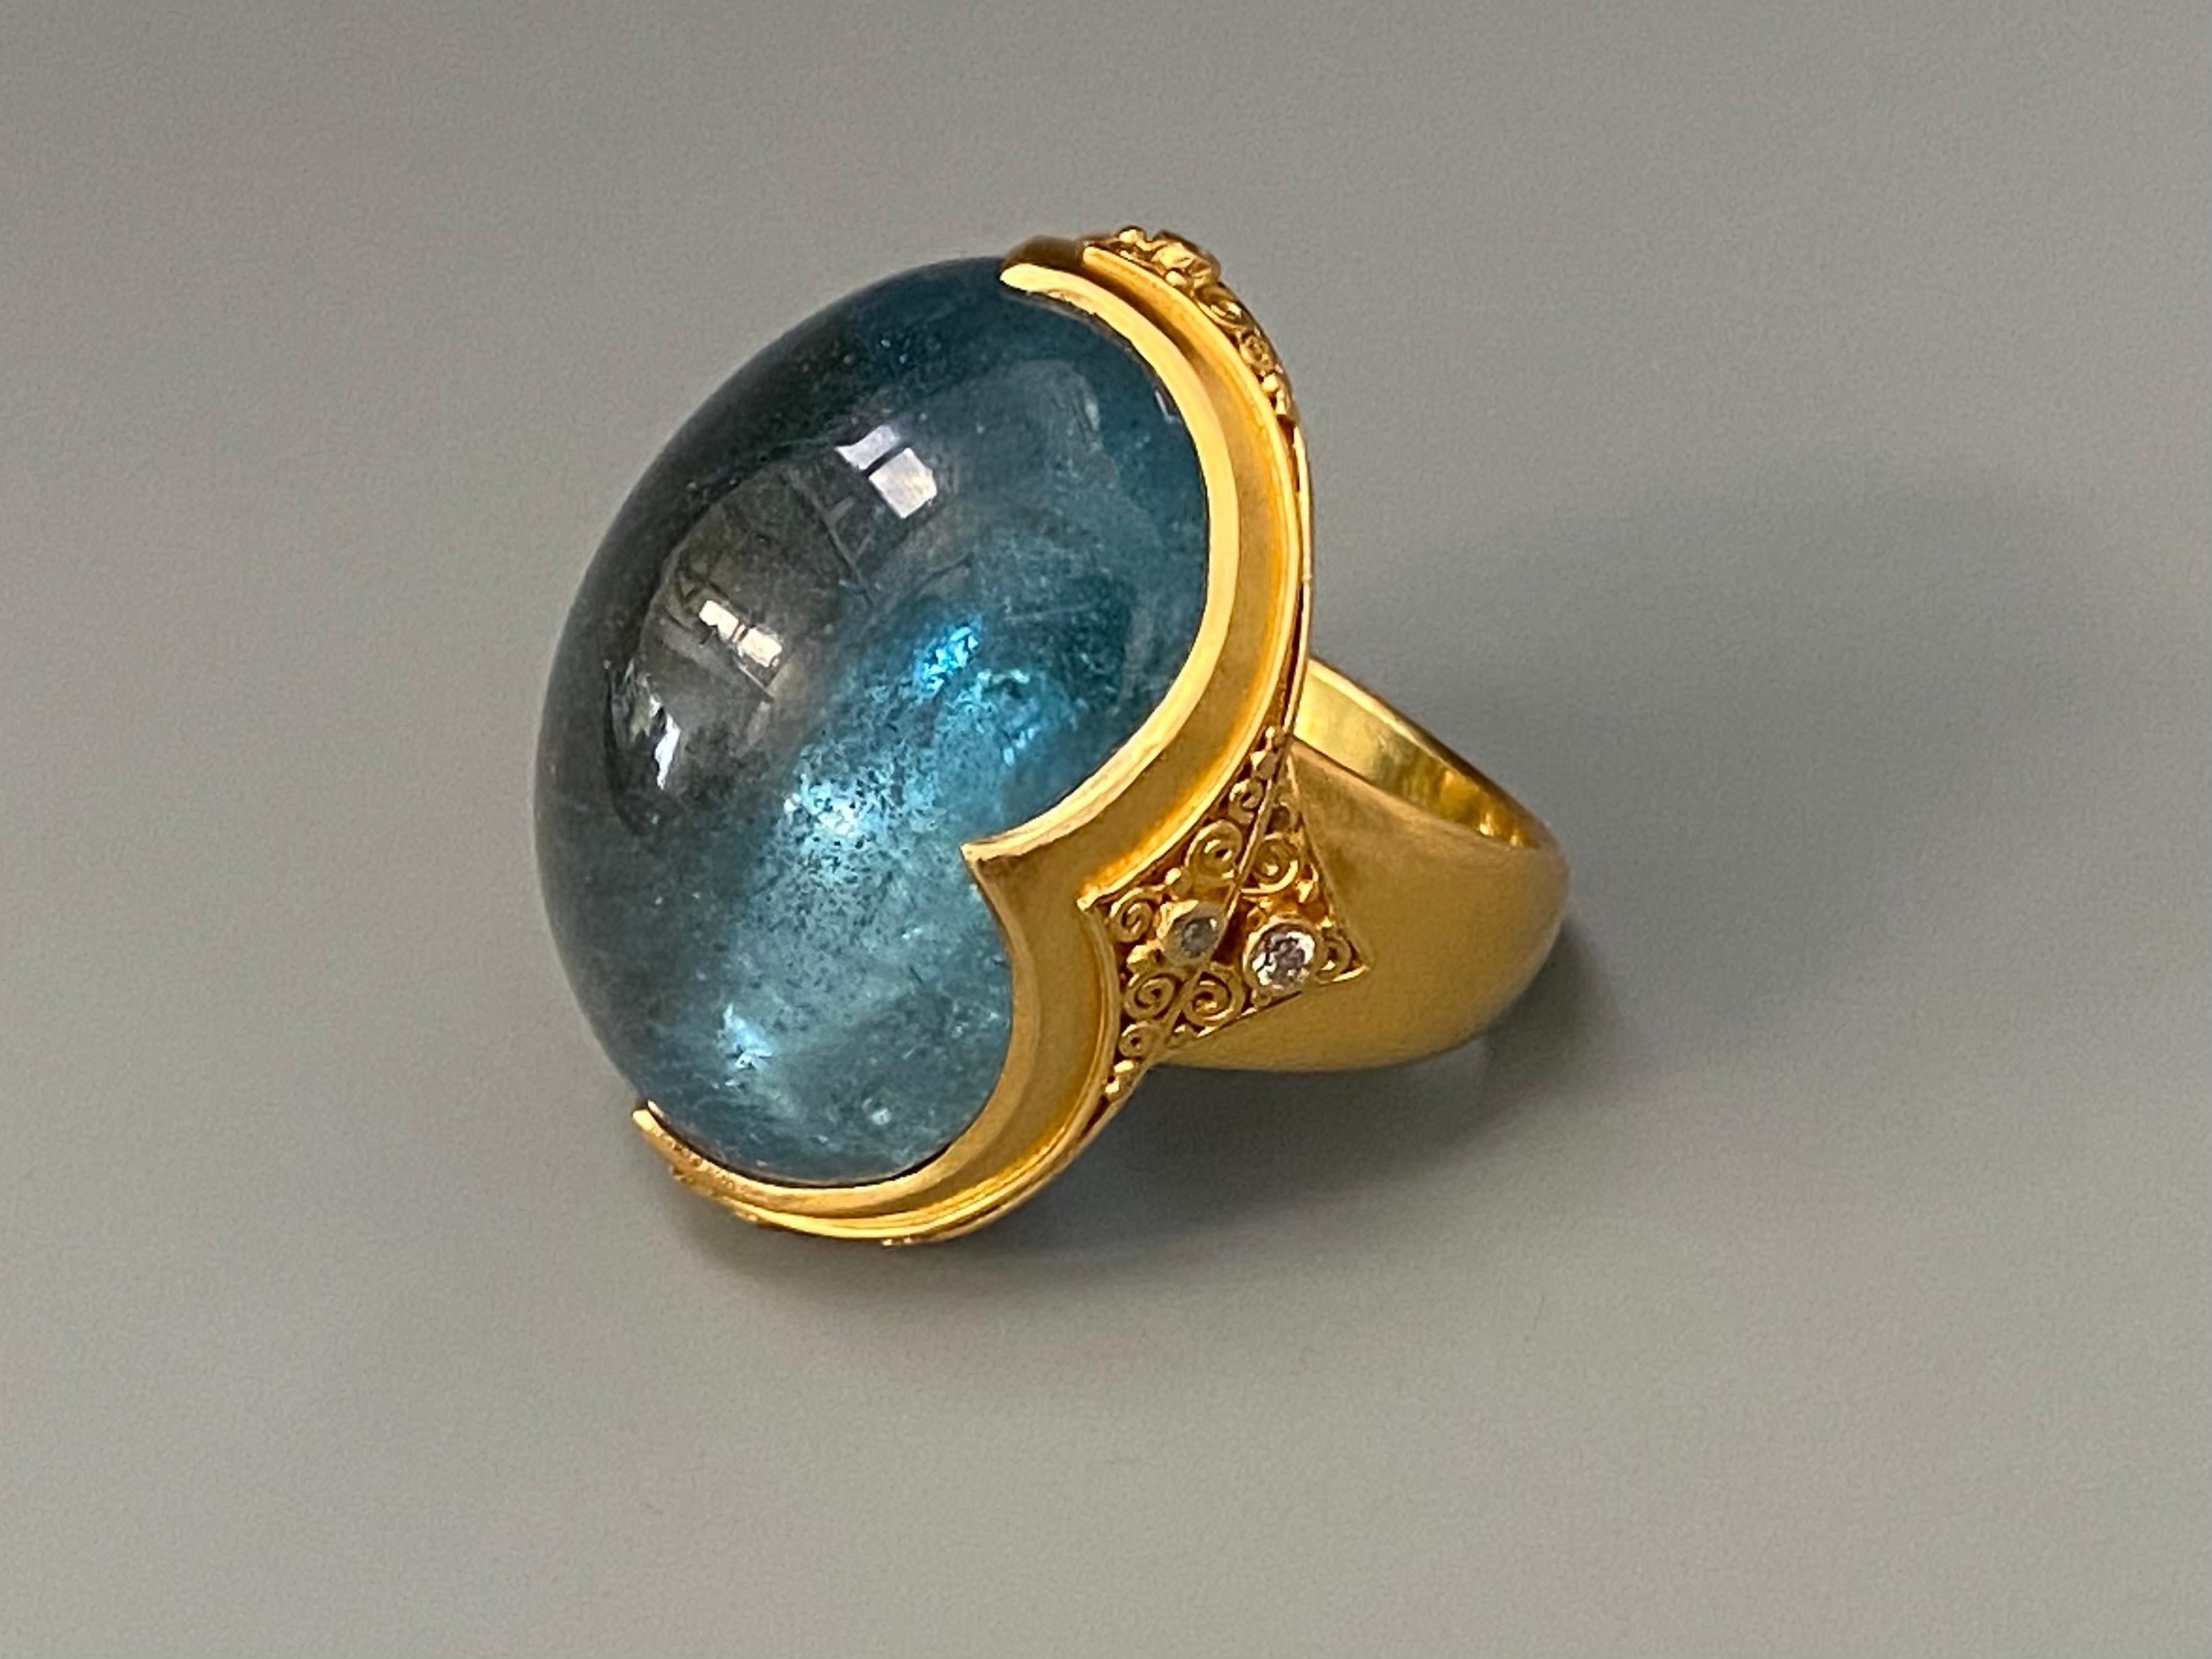 A clear, and luminous, deep blue Brazilian Aquamarine oval cabochon is set in a signature Steven Battelle ancient inspired 